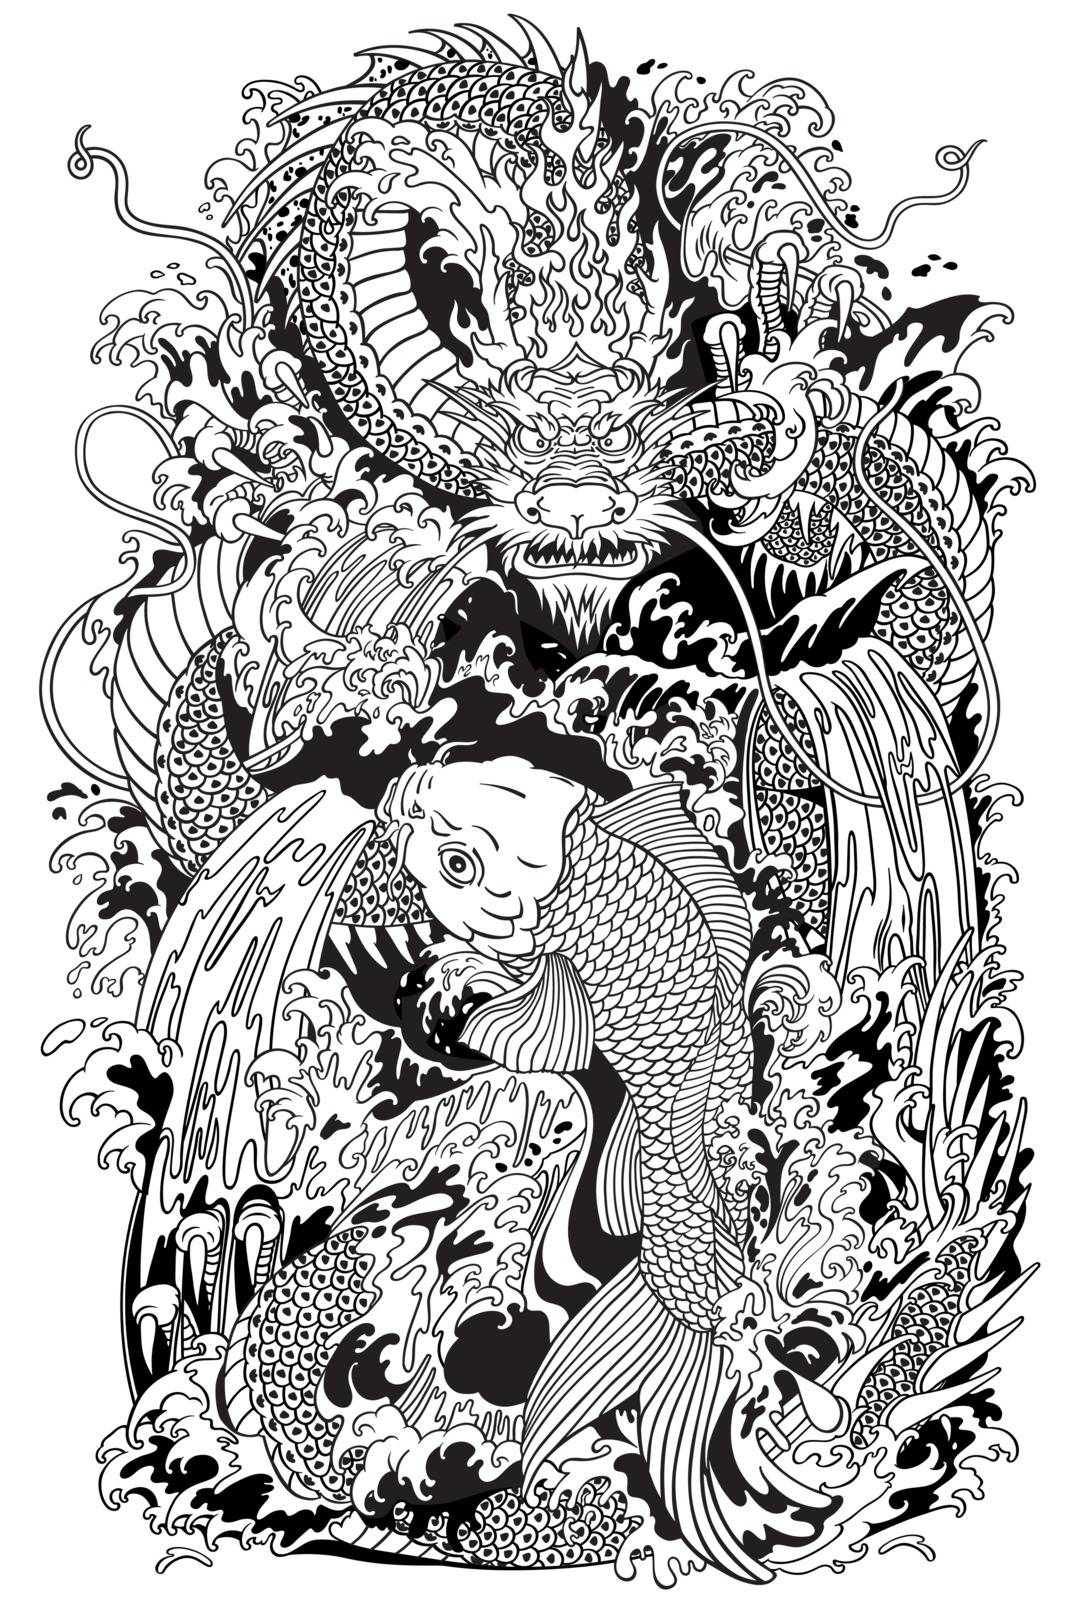 koi carp fish and dragon gate. Black and white illustration by insima